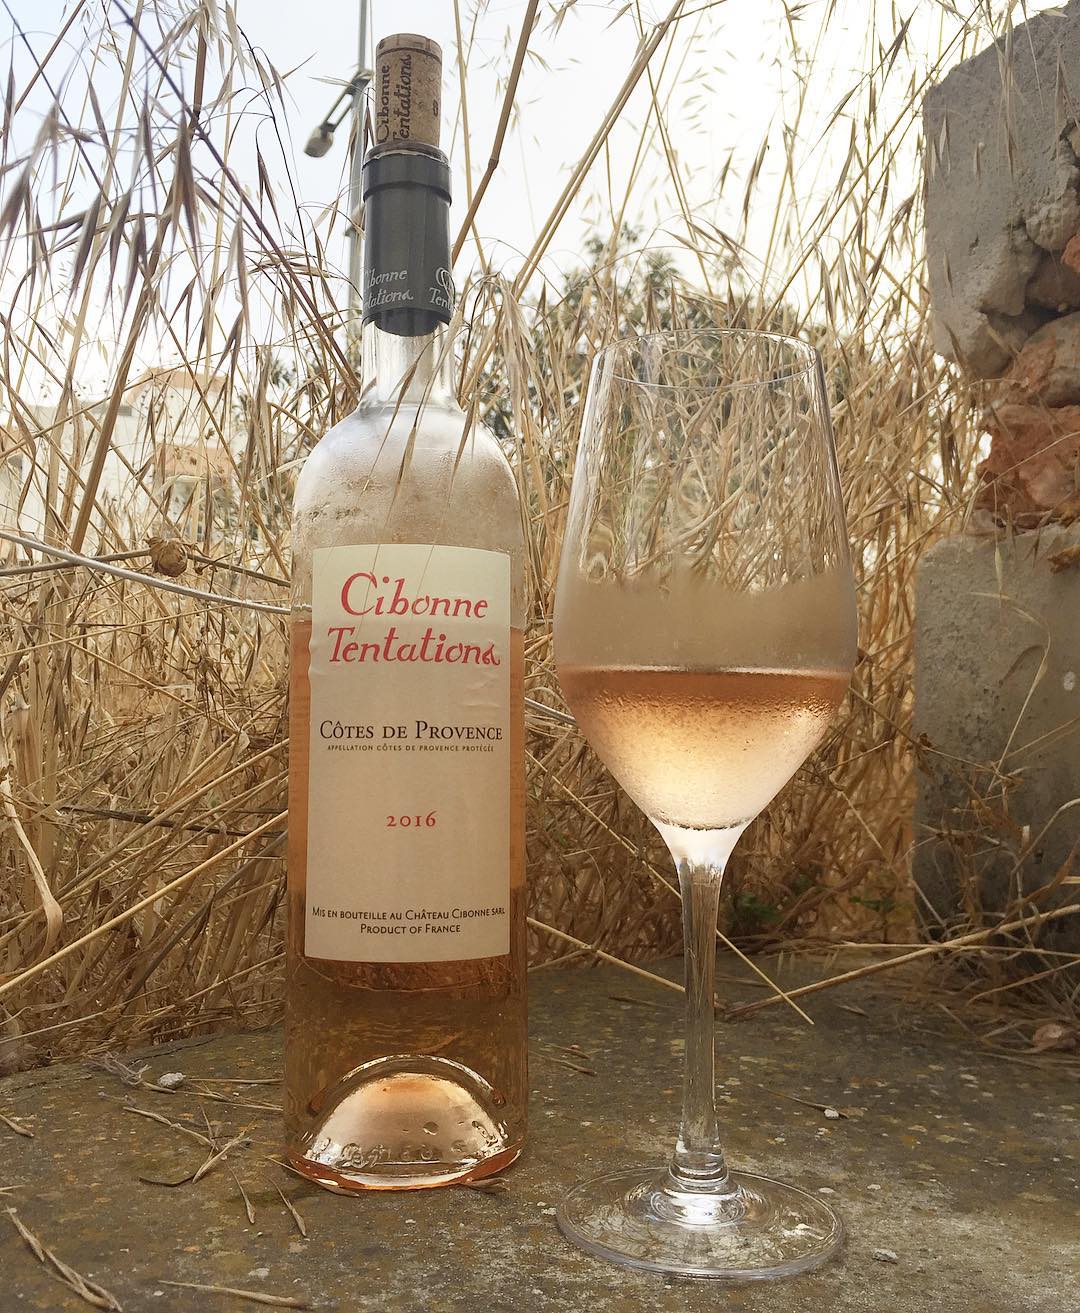 Rosé today! This is the Clos Cibonne Tentations, made with a grape called Tibouren (amongst others) which cluster reaches maturity only on the Mediterranean coast. Concentrated with fruity notes, this rosé is a serious elegant one! @vinoycoibiza #vinoyco #ibiza #ibiza2017 #roséallday #rosélovers #cotesdeprovence #wineshop #winelovers #vinoycowines